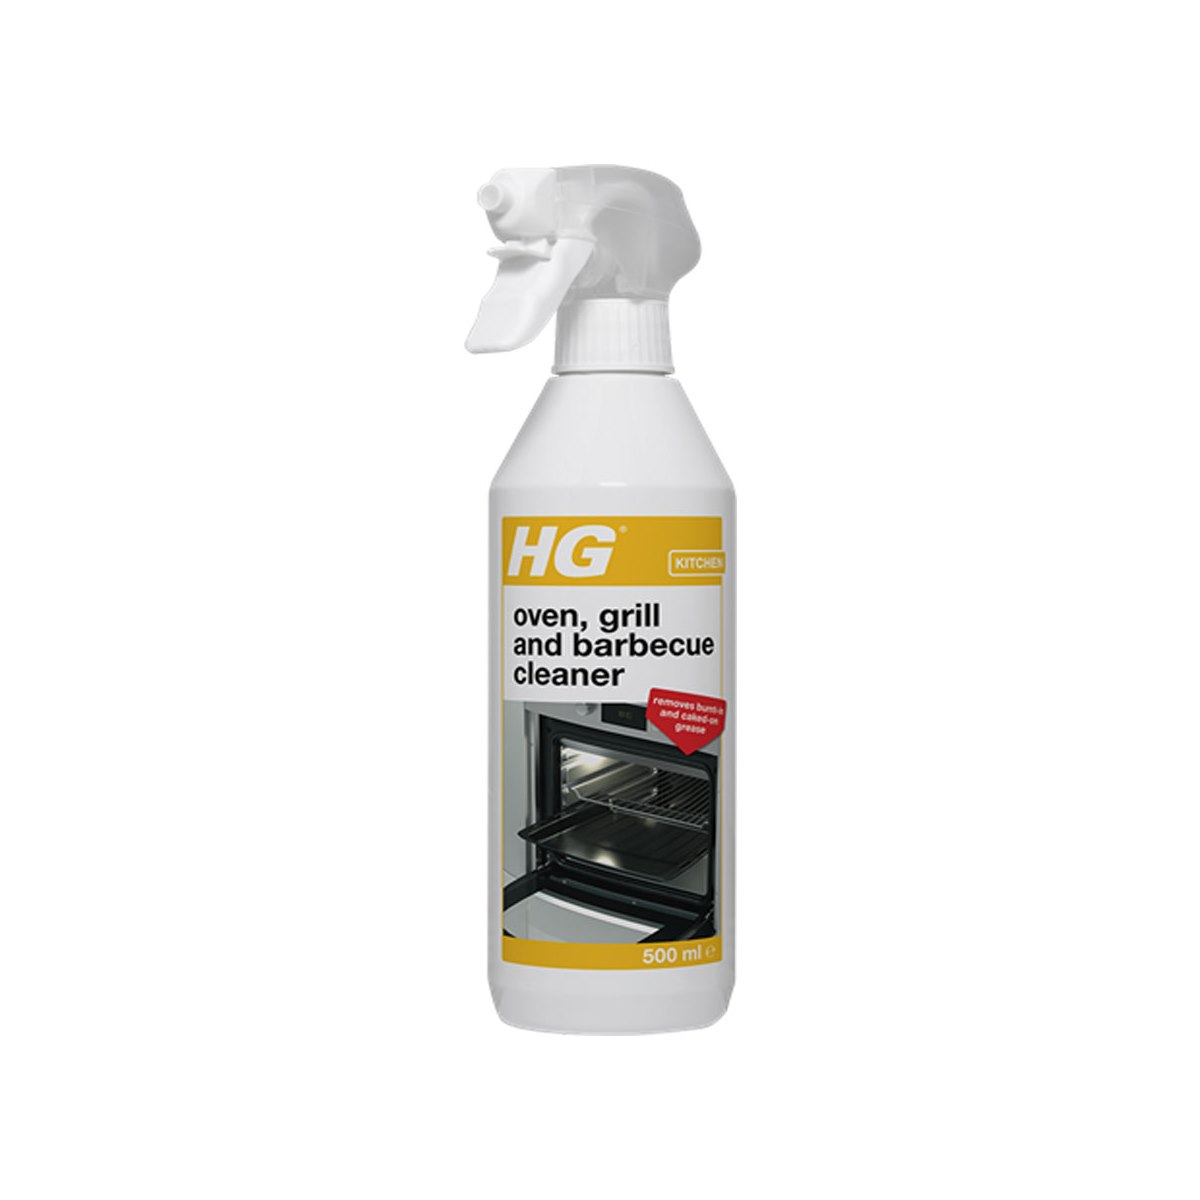 HG Oven, Grill and Barbecue Cleaner Spray 500ml